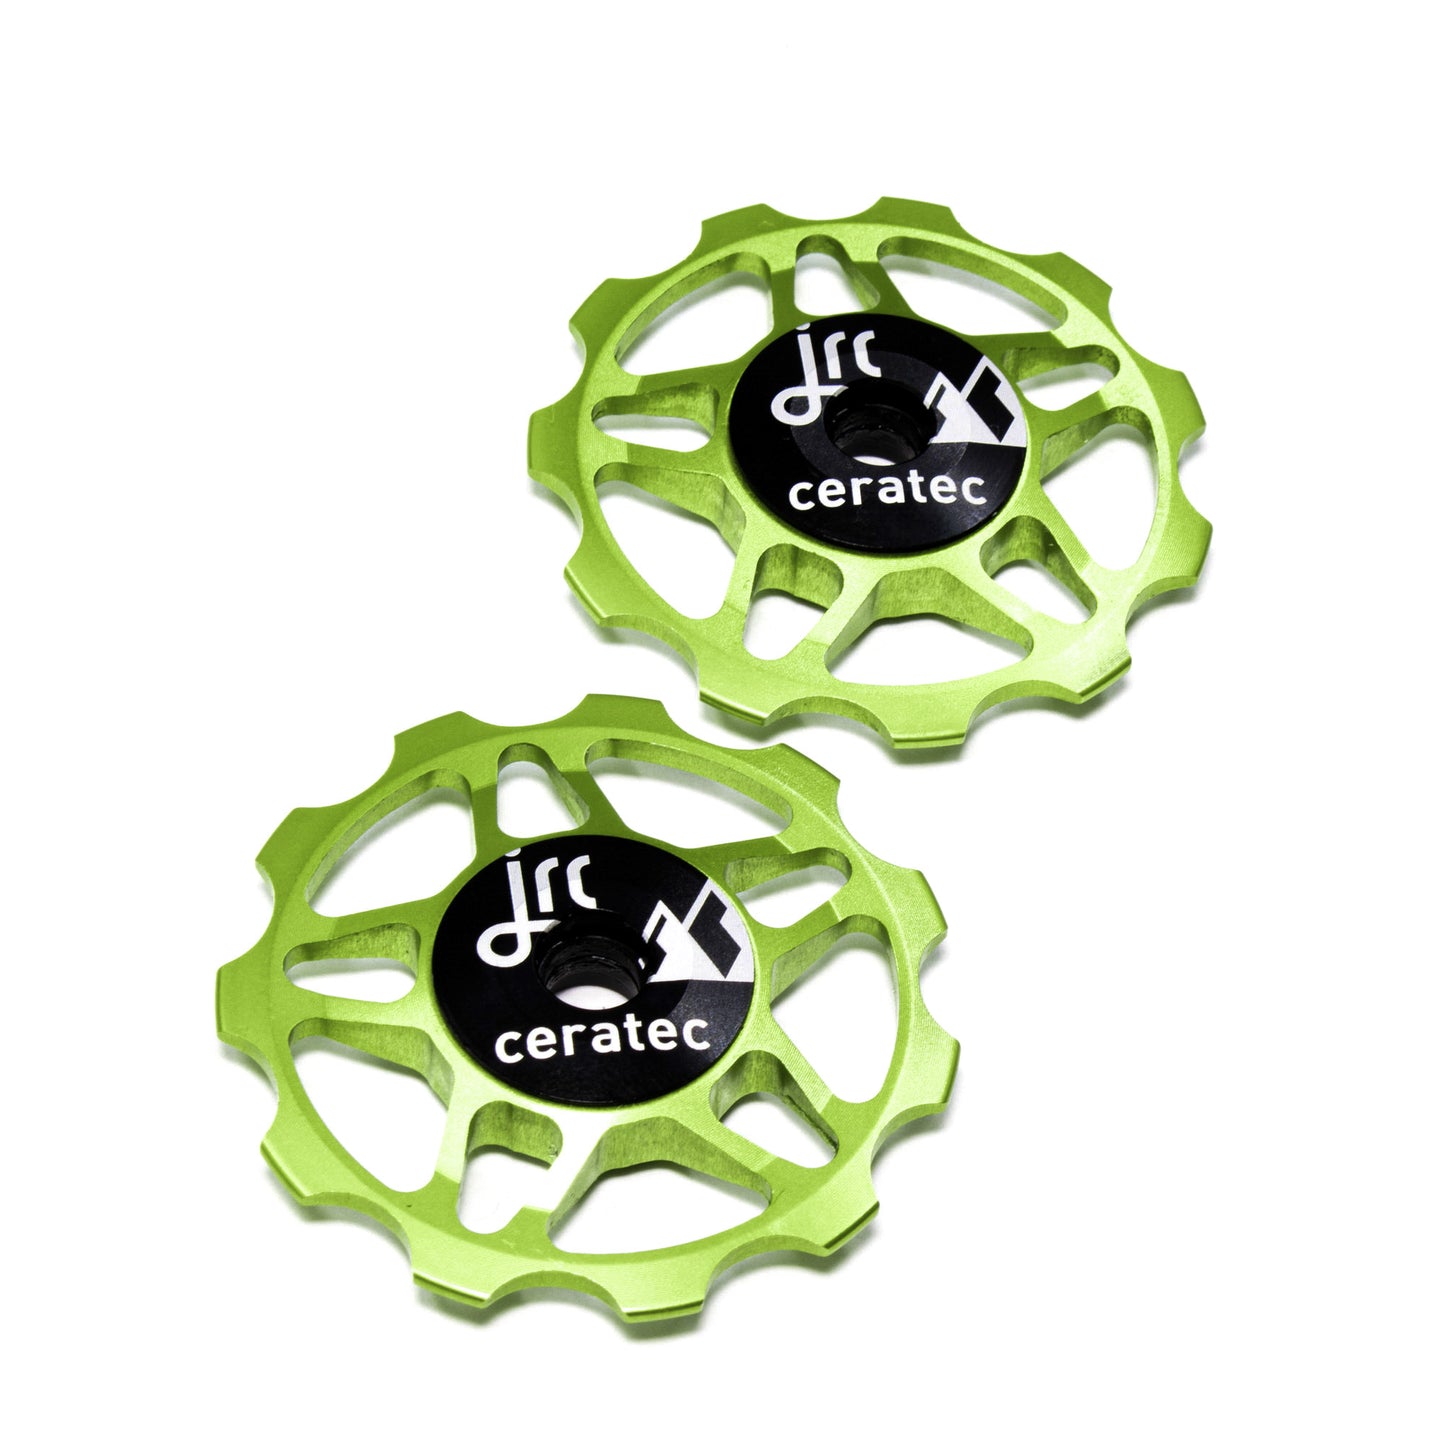 Acid green, lightweight aluminium 11 tooth pulley wheel set for bicycles, for Shimano SRAM and Campagnolo